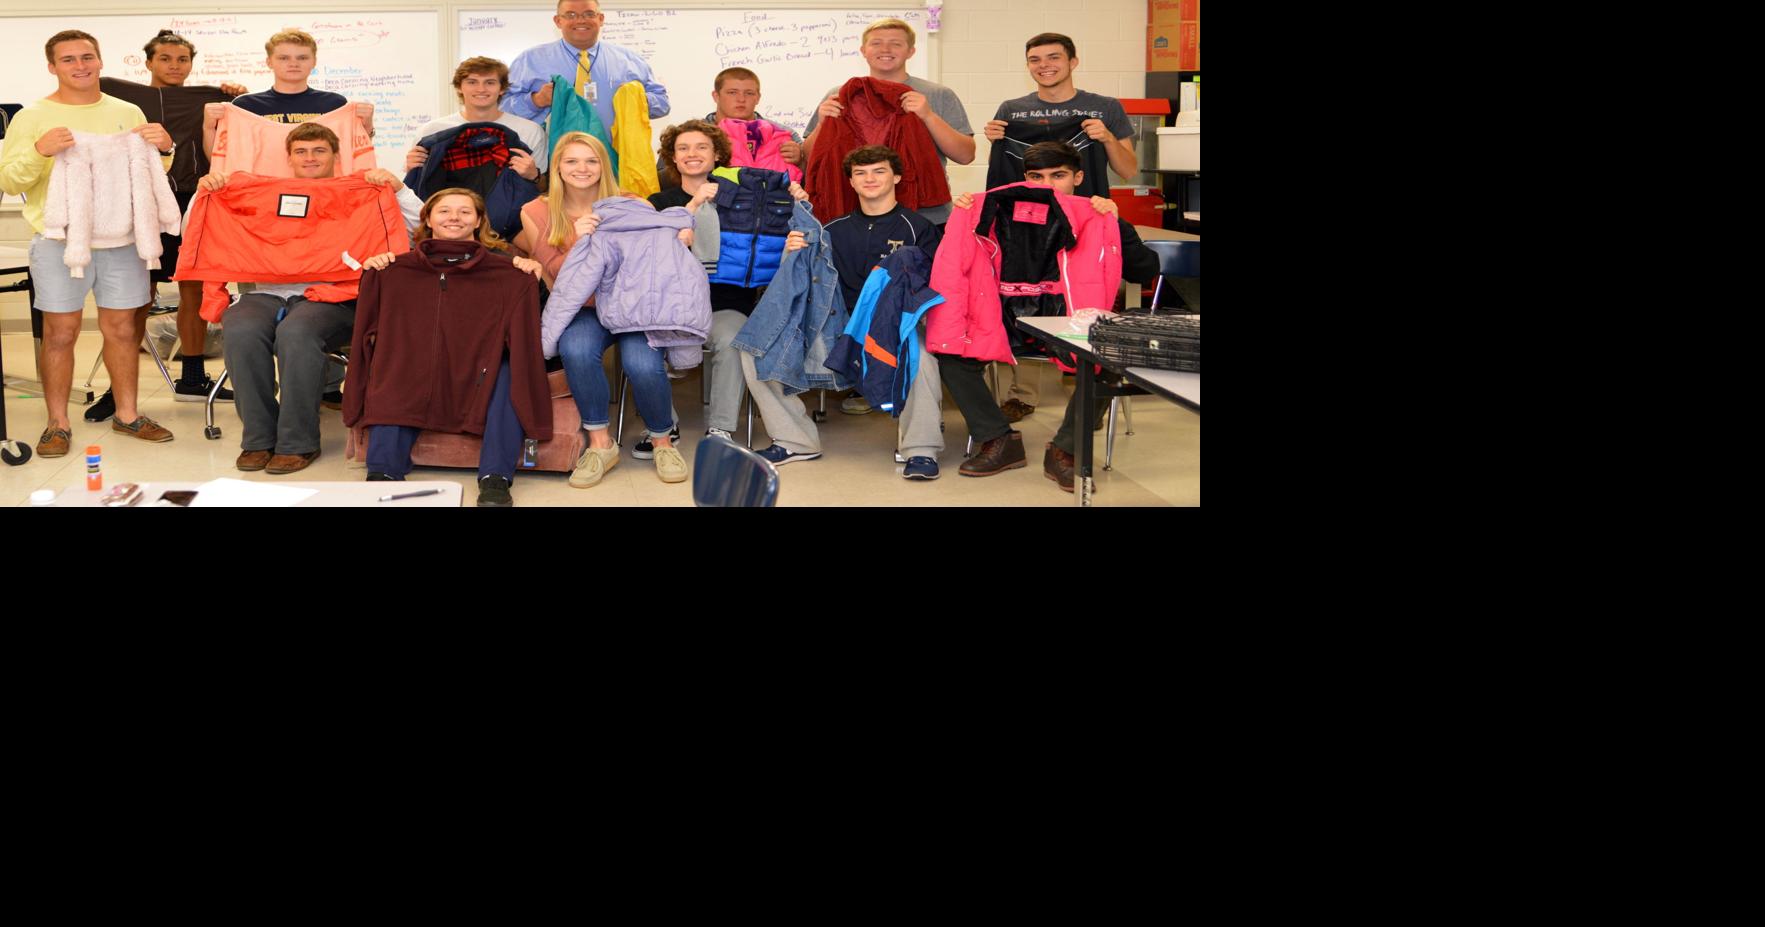 Roanoke City Public Schools collects winter coats for students